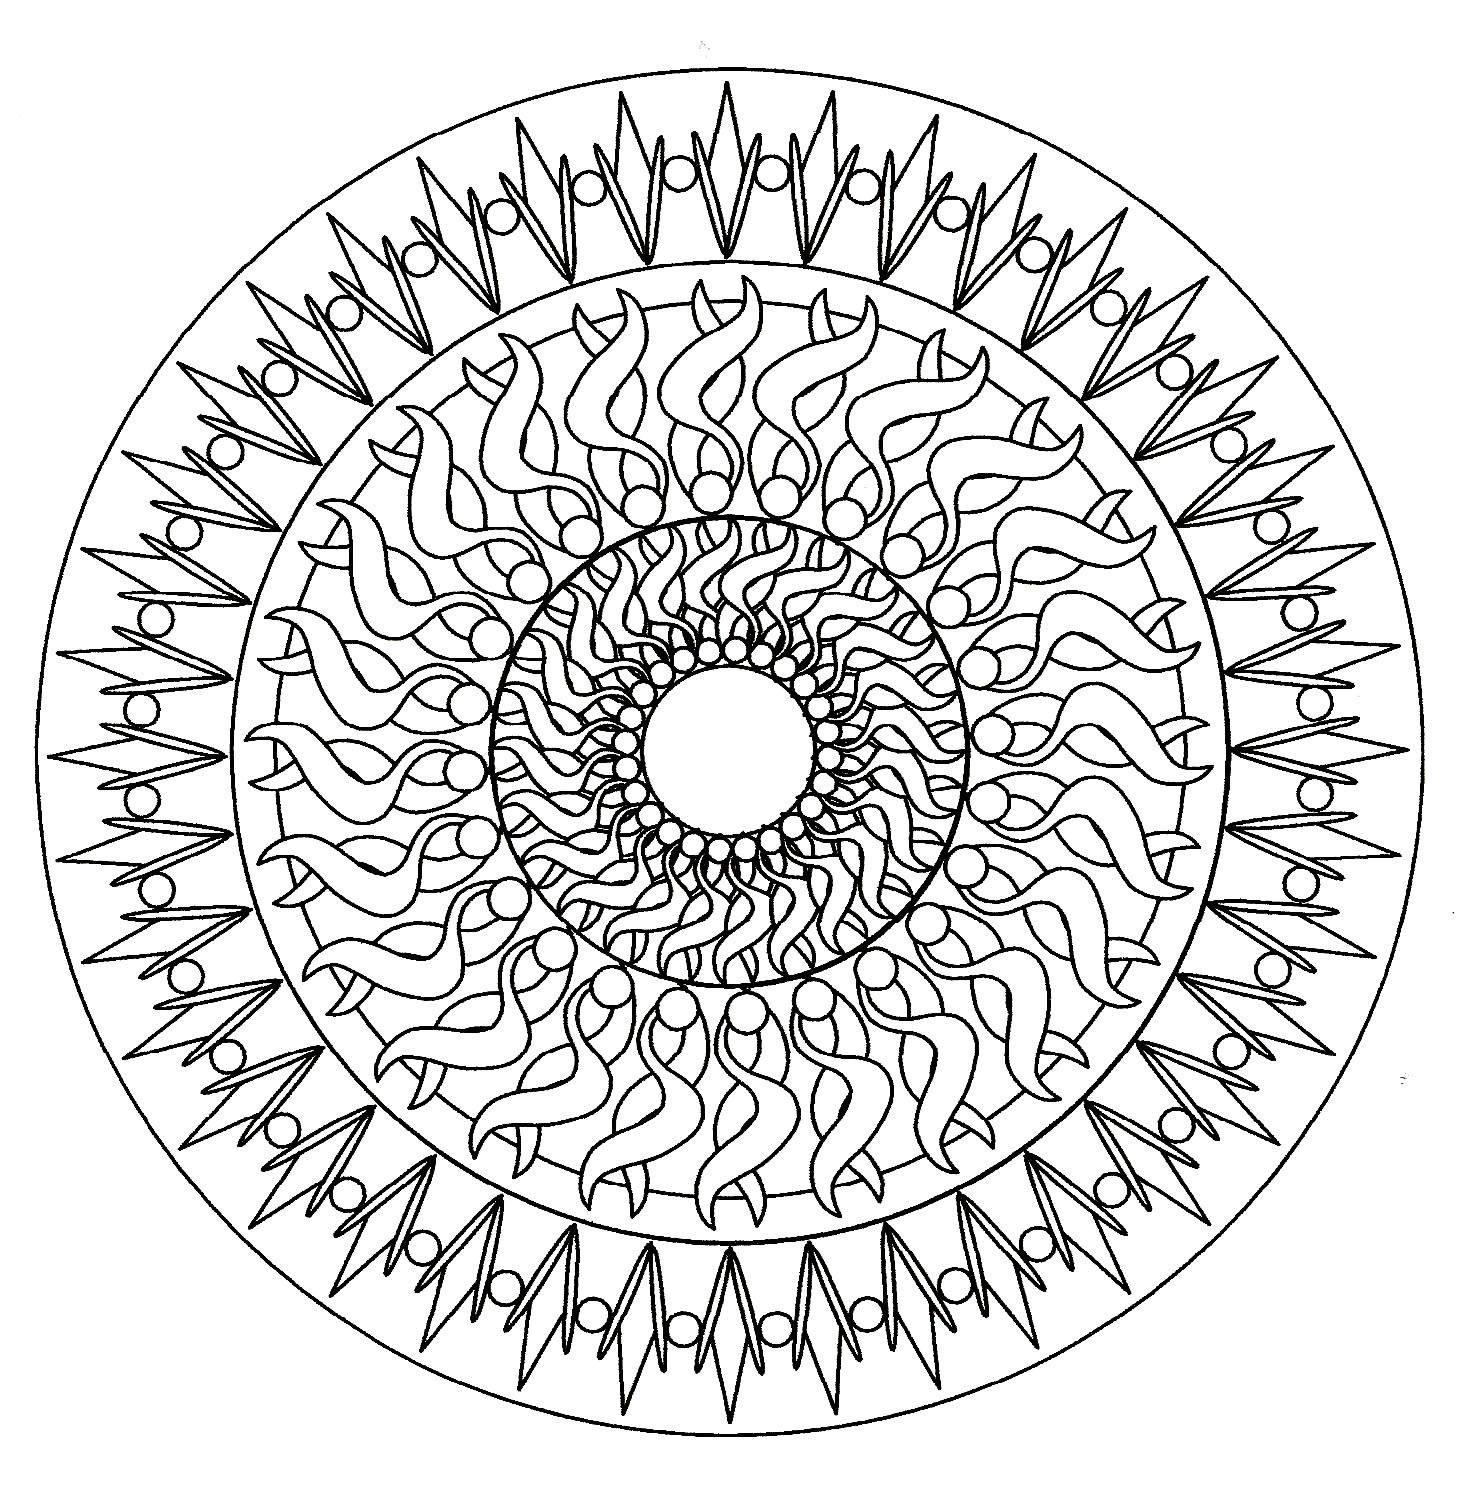 When coloring can really relax you ... This is the case with this Mandala coloring page of high quality. Did you know ? A Mandala represents wholeness, a cosmic diagram reminding us of our relation to infinity